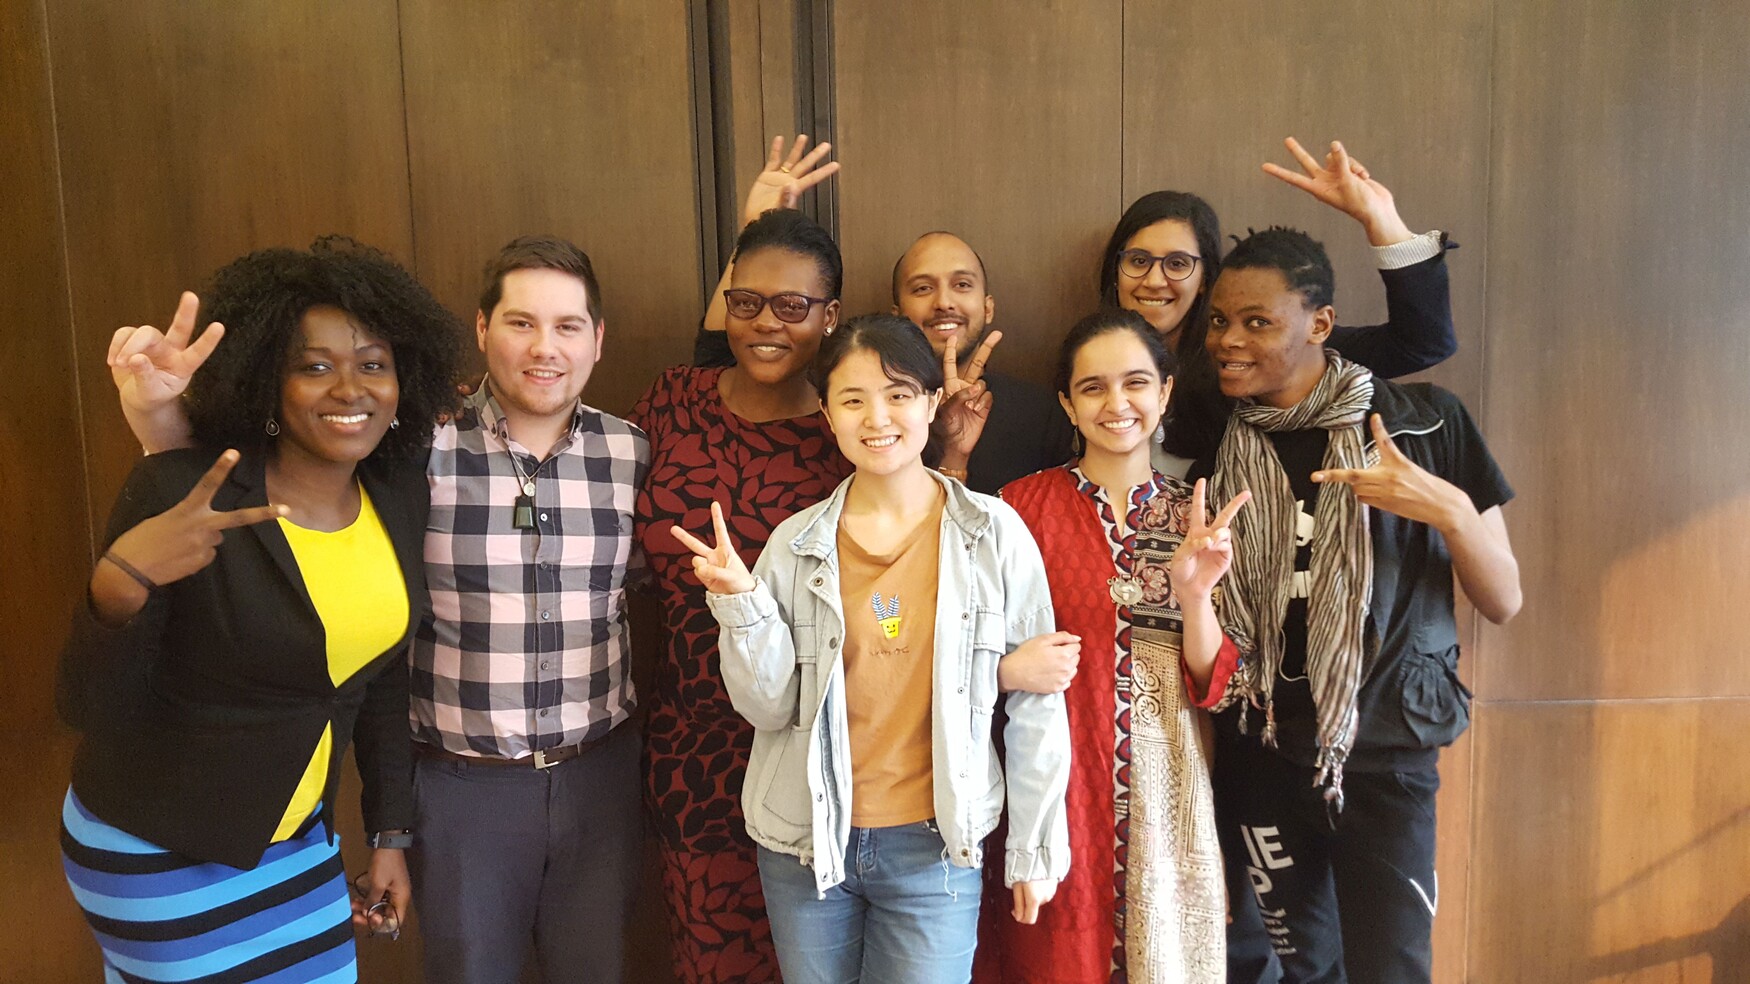 Lancet Youth Commissioners from Nigeria, New Zealand, Zambia, Sri Lanka, China, India and Uganda; U of T medical student Mariam Naguib is pictured in the top row, far right.